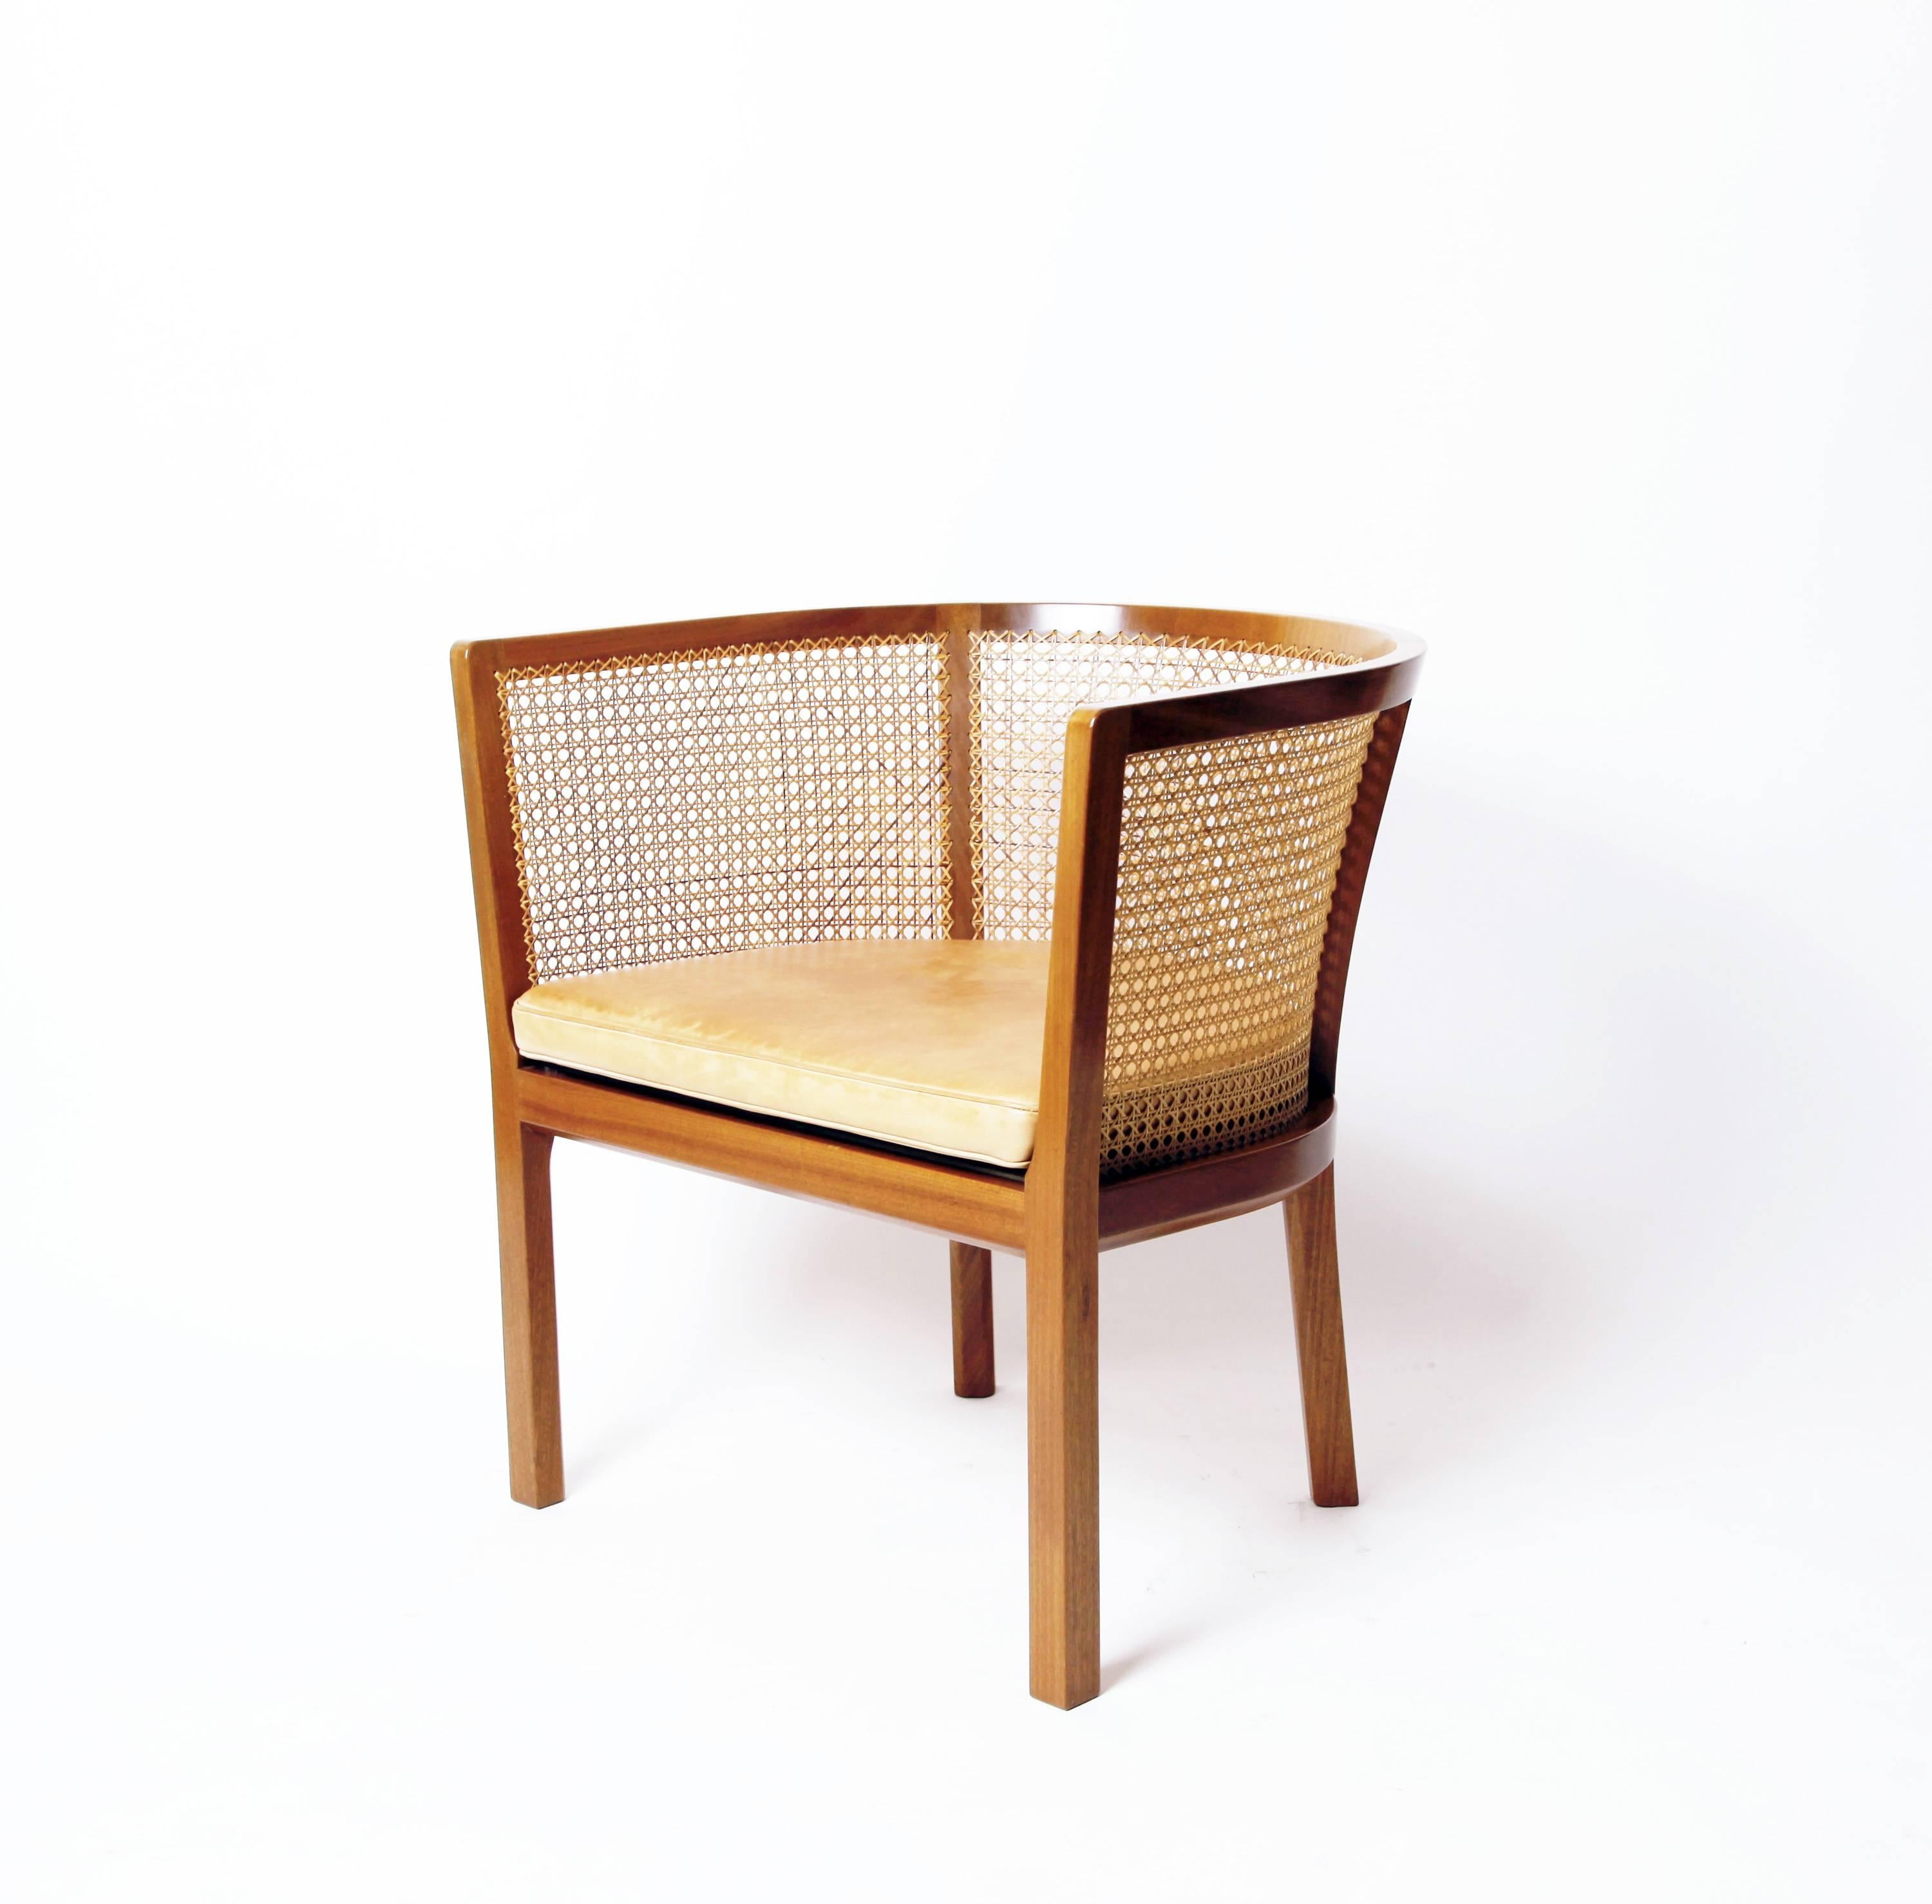 These beautifully proportioned chairs were designed by Bernt Petersen, a cabinetmaker often known simply as Bernt, who trained at the Royal Danish Academy of Fine Arts and worked for Hans Wegner before starting his own studio in 1963. The model 304